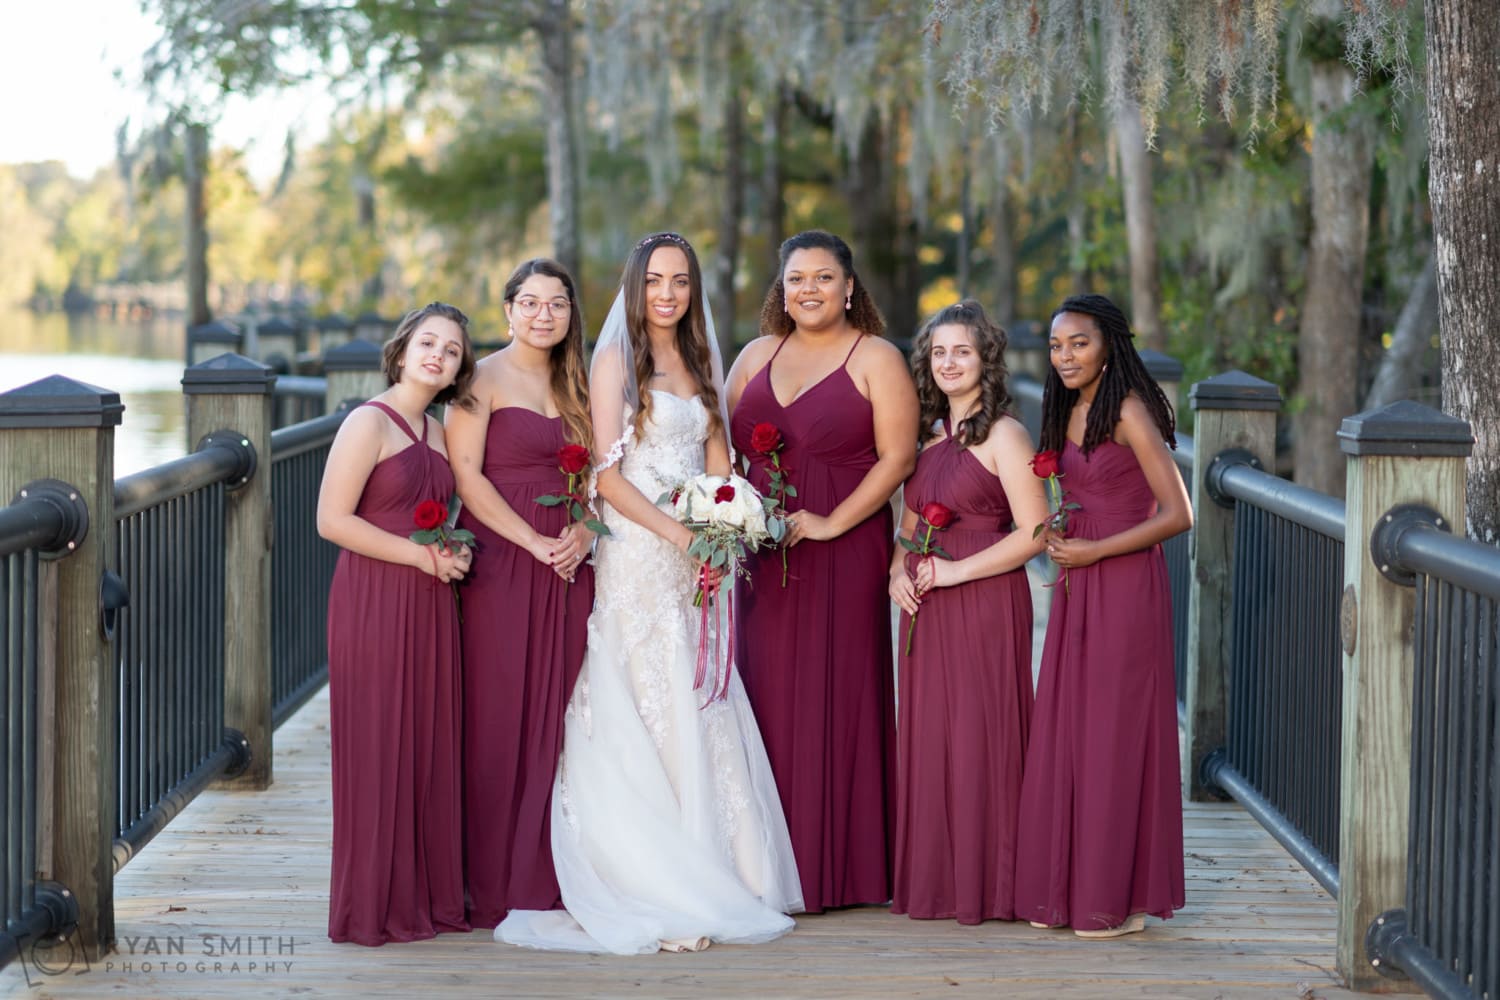 Bridal party portrait with bridesmaids holding a rose - Conway River Walk